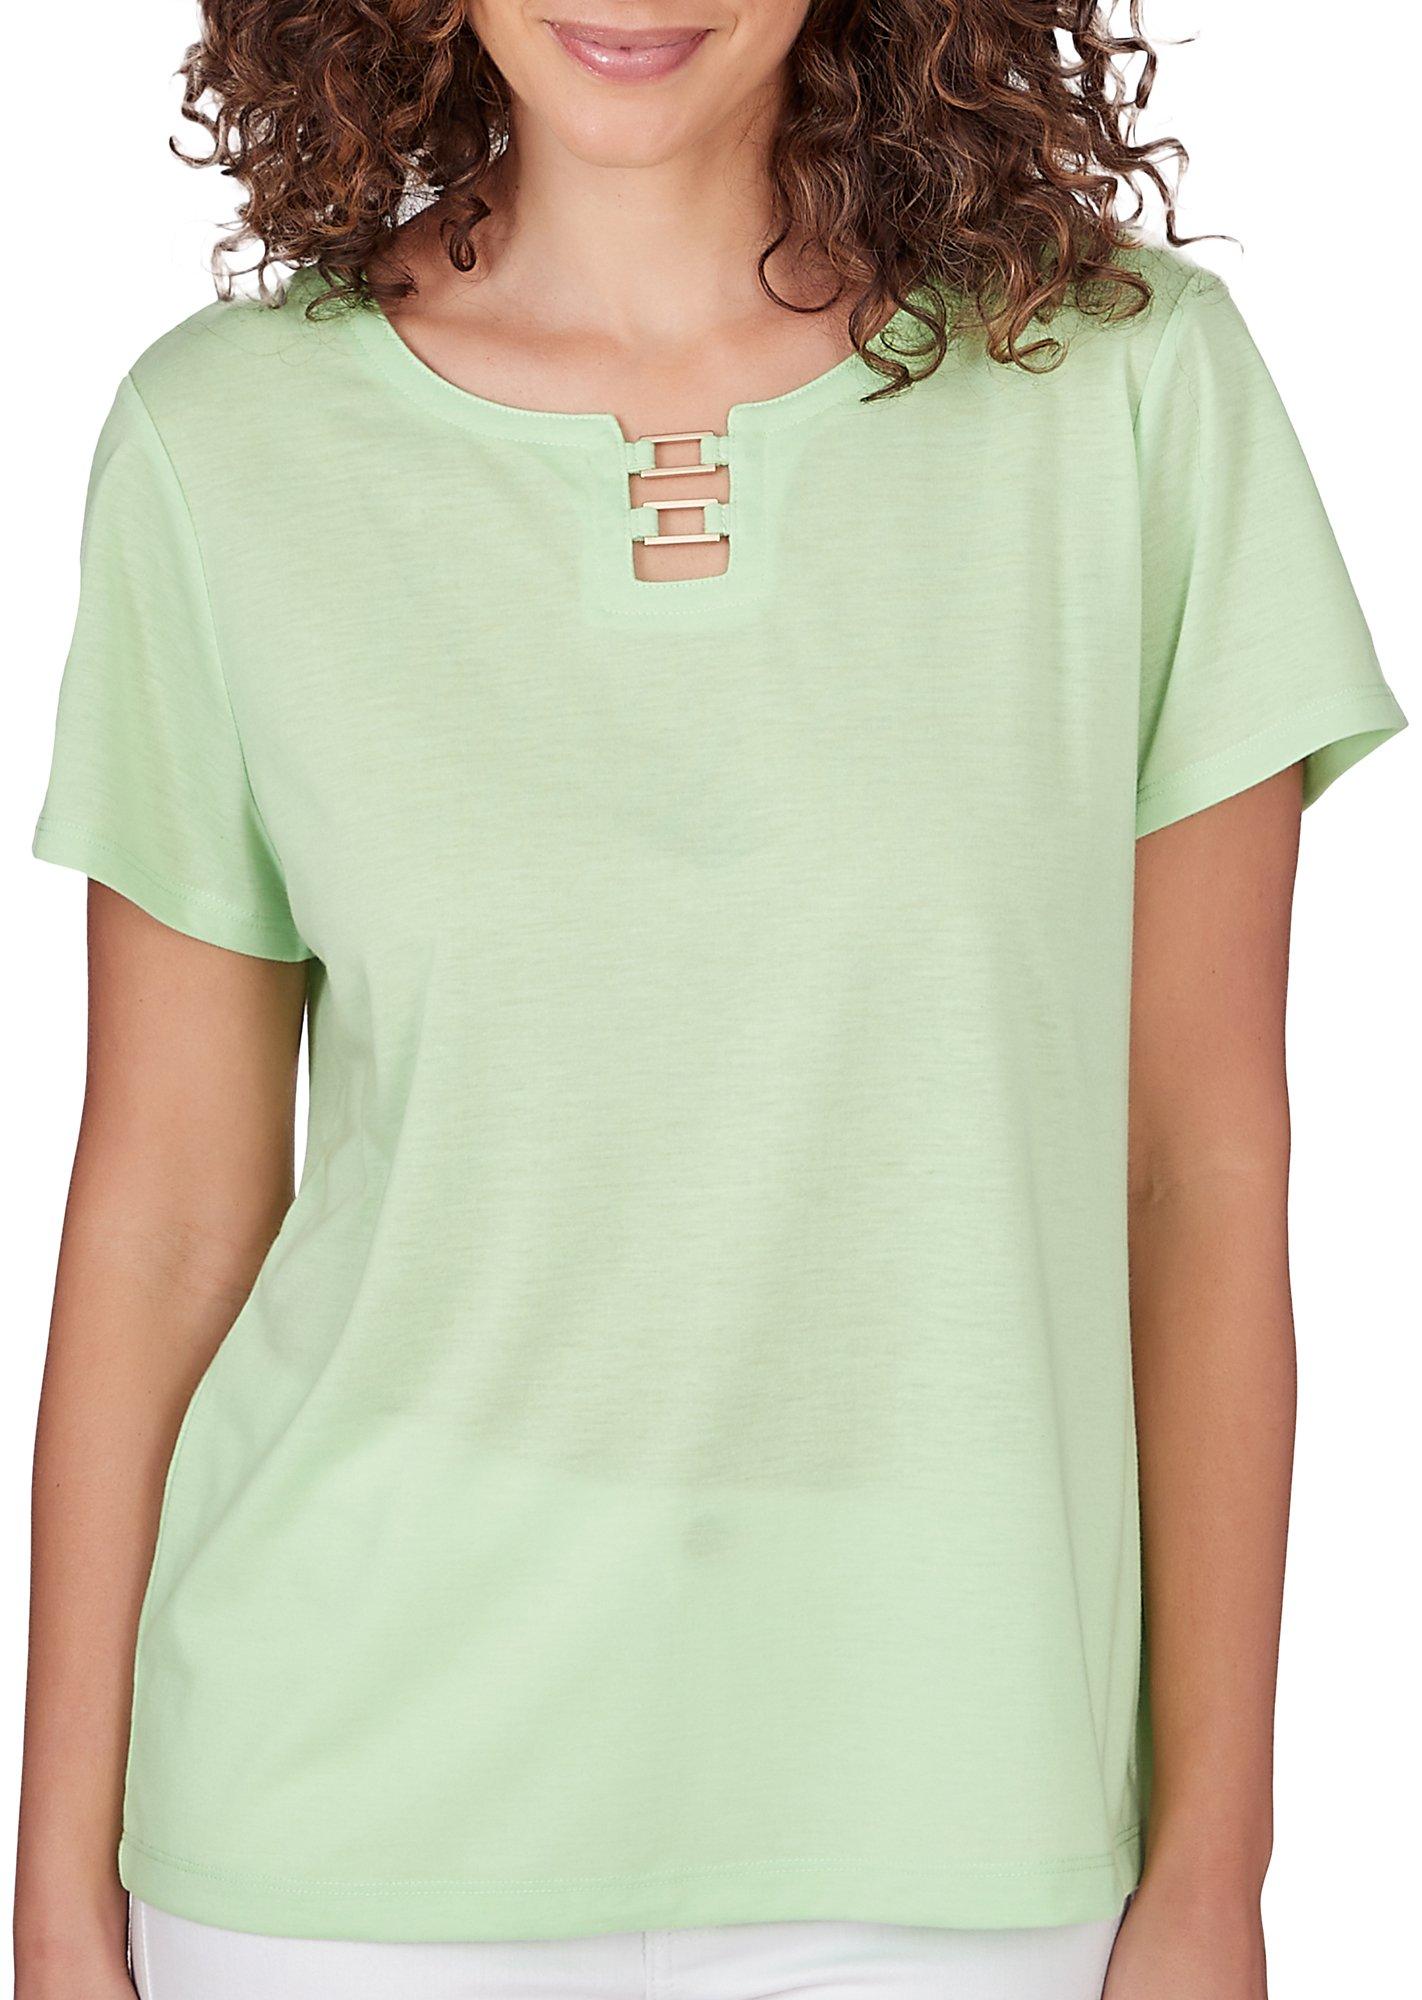 Hearts of Palm Womens Ring Embellished Short Sleeve Top